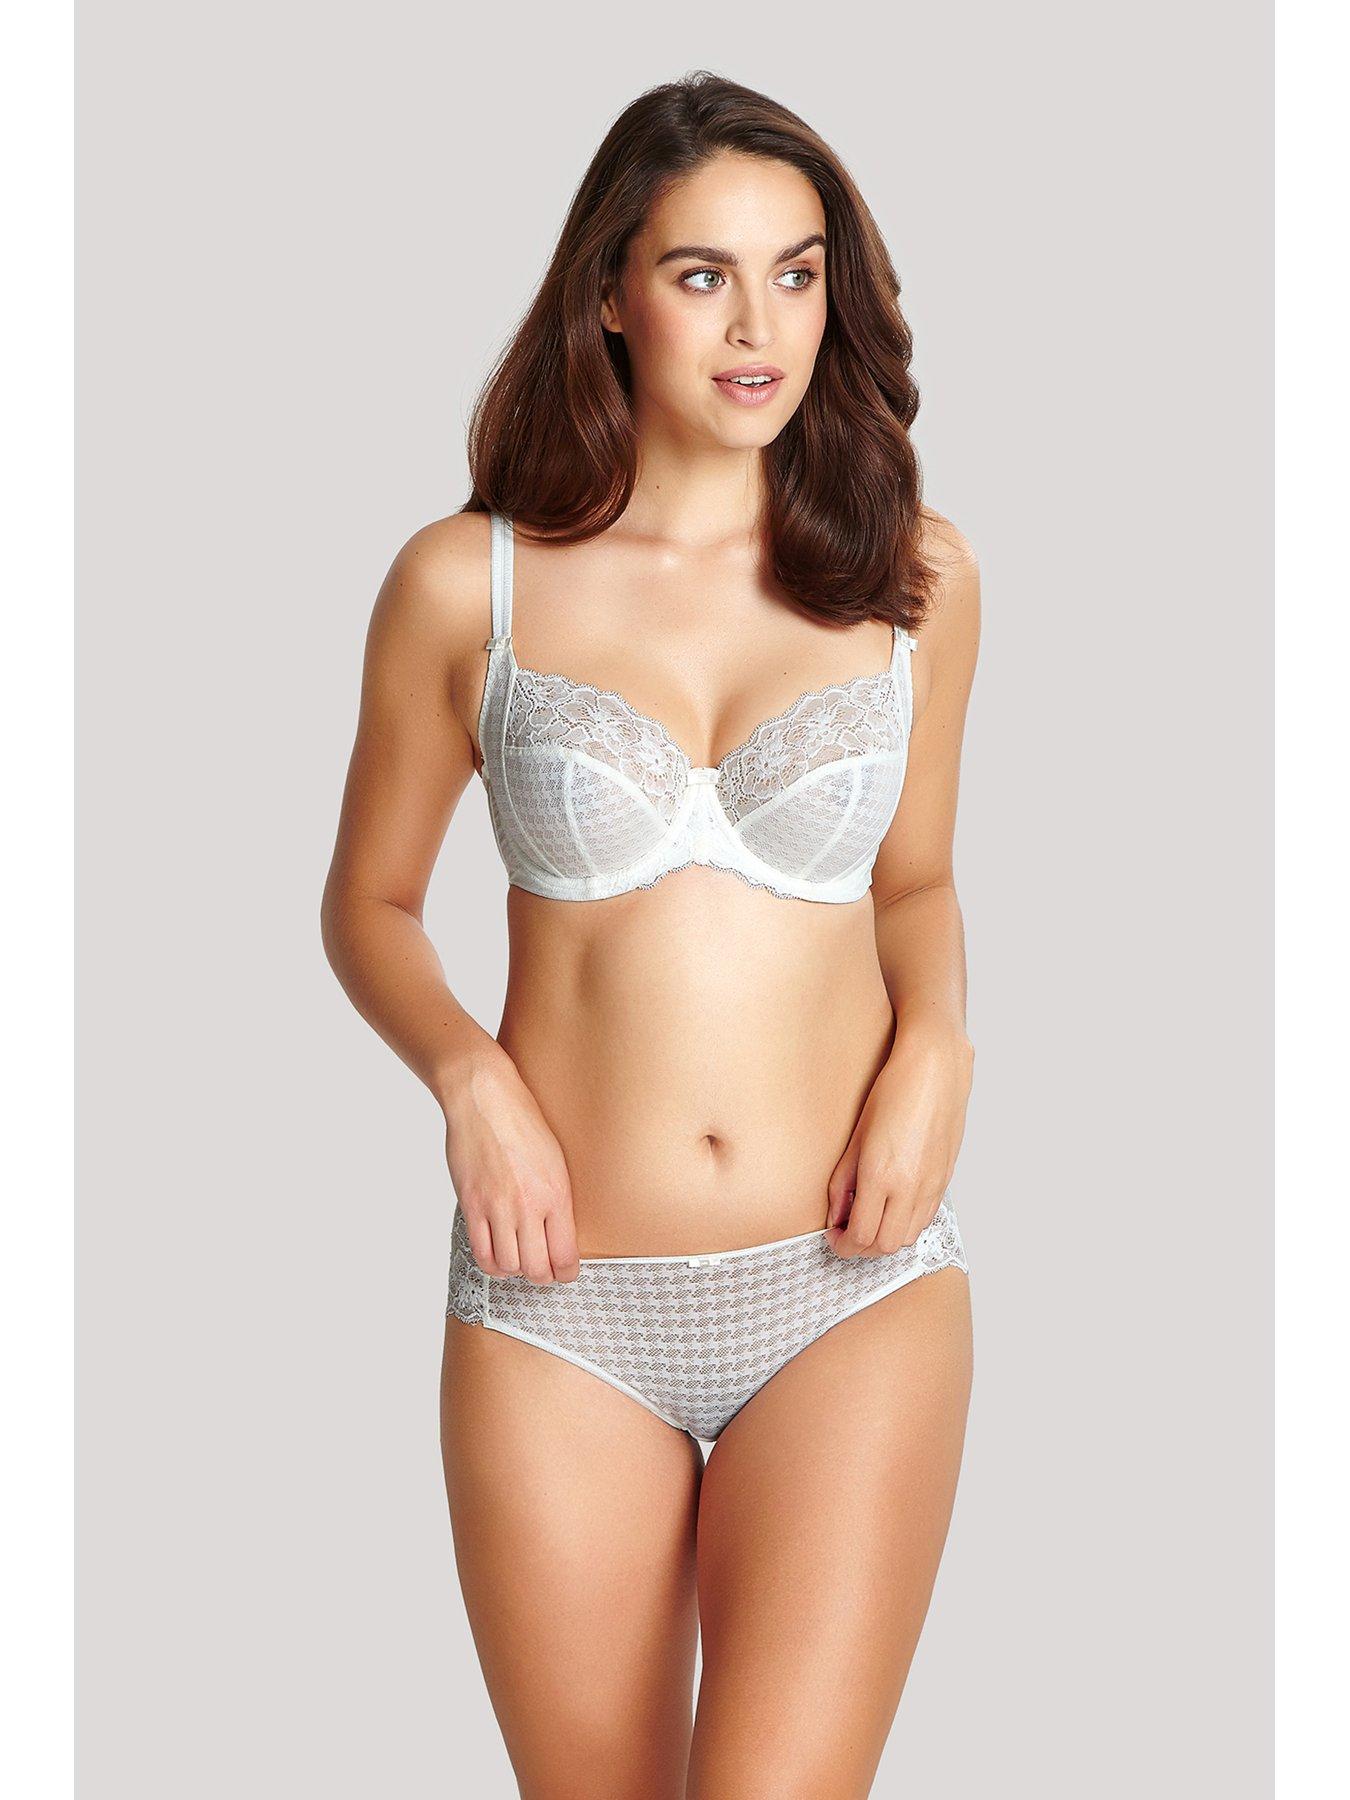 Panache Envy Full Cup Bra in Orchid FINAL SALE (30% Off) - Busted